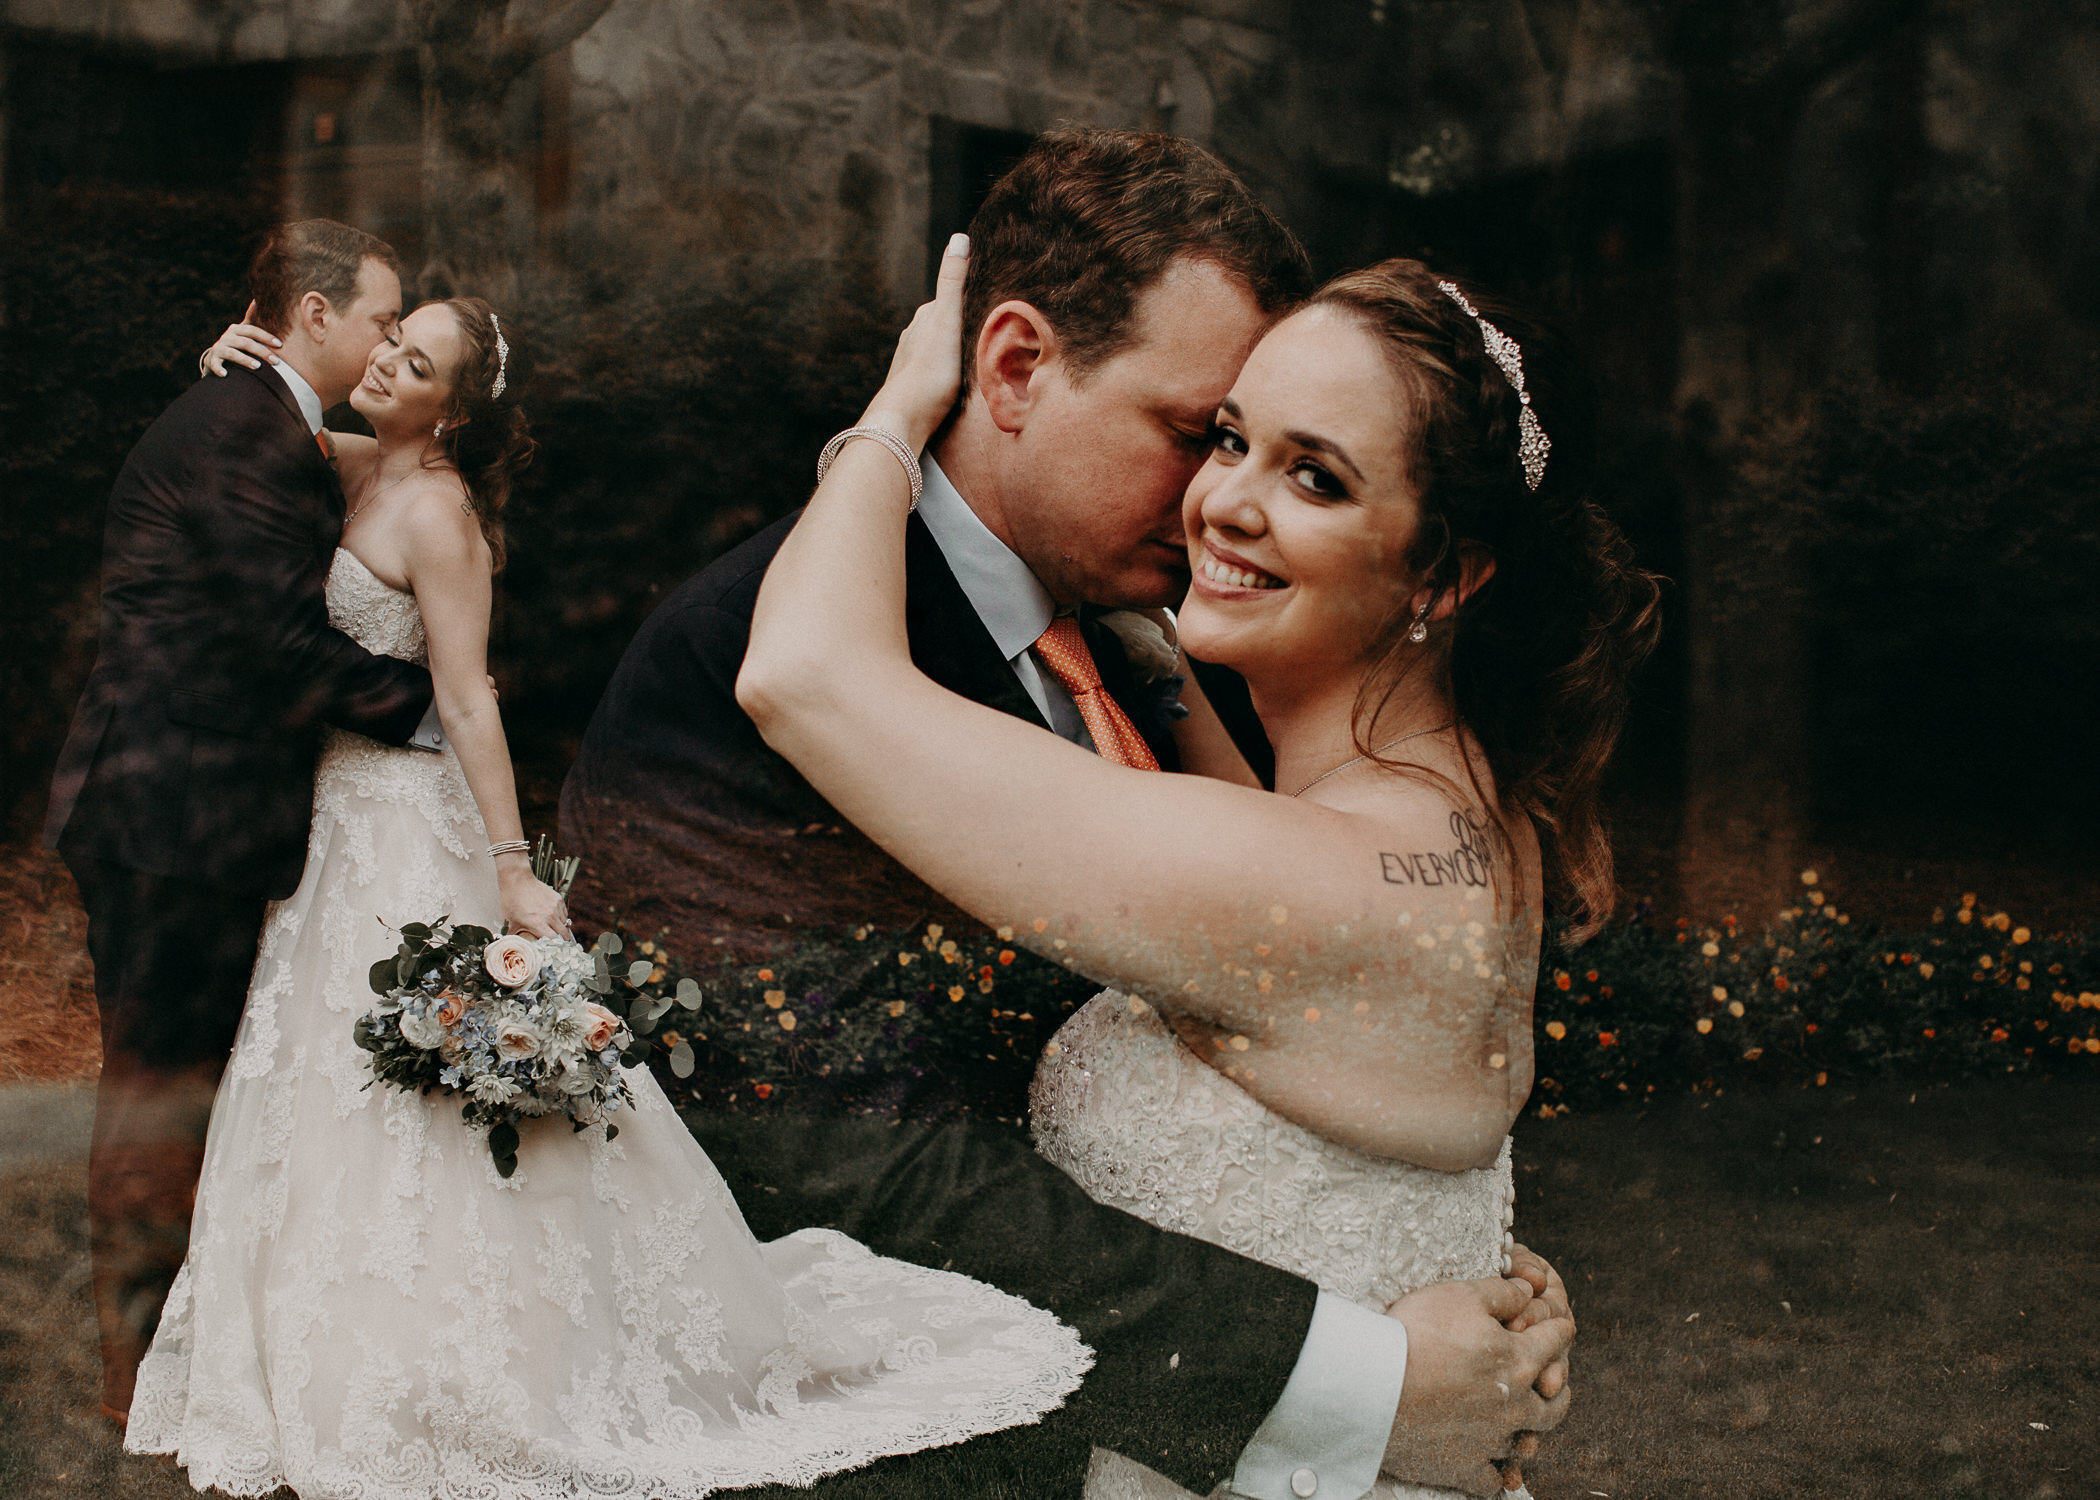 Christa & Ben's Wedding Day || Atlanta Spring Wedding at The Country Club of The South41.jpg